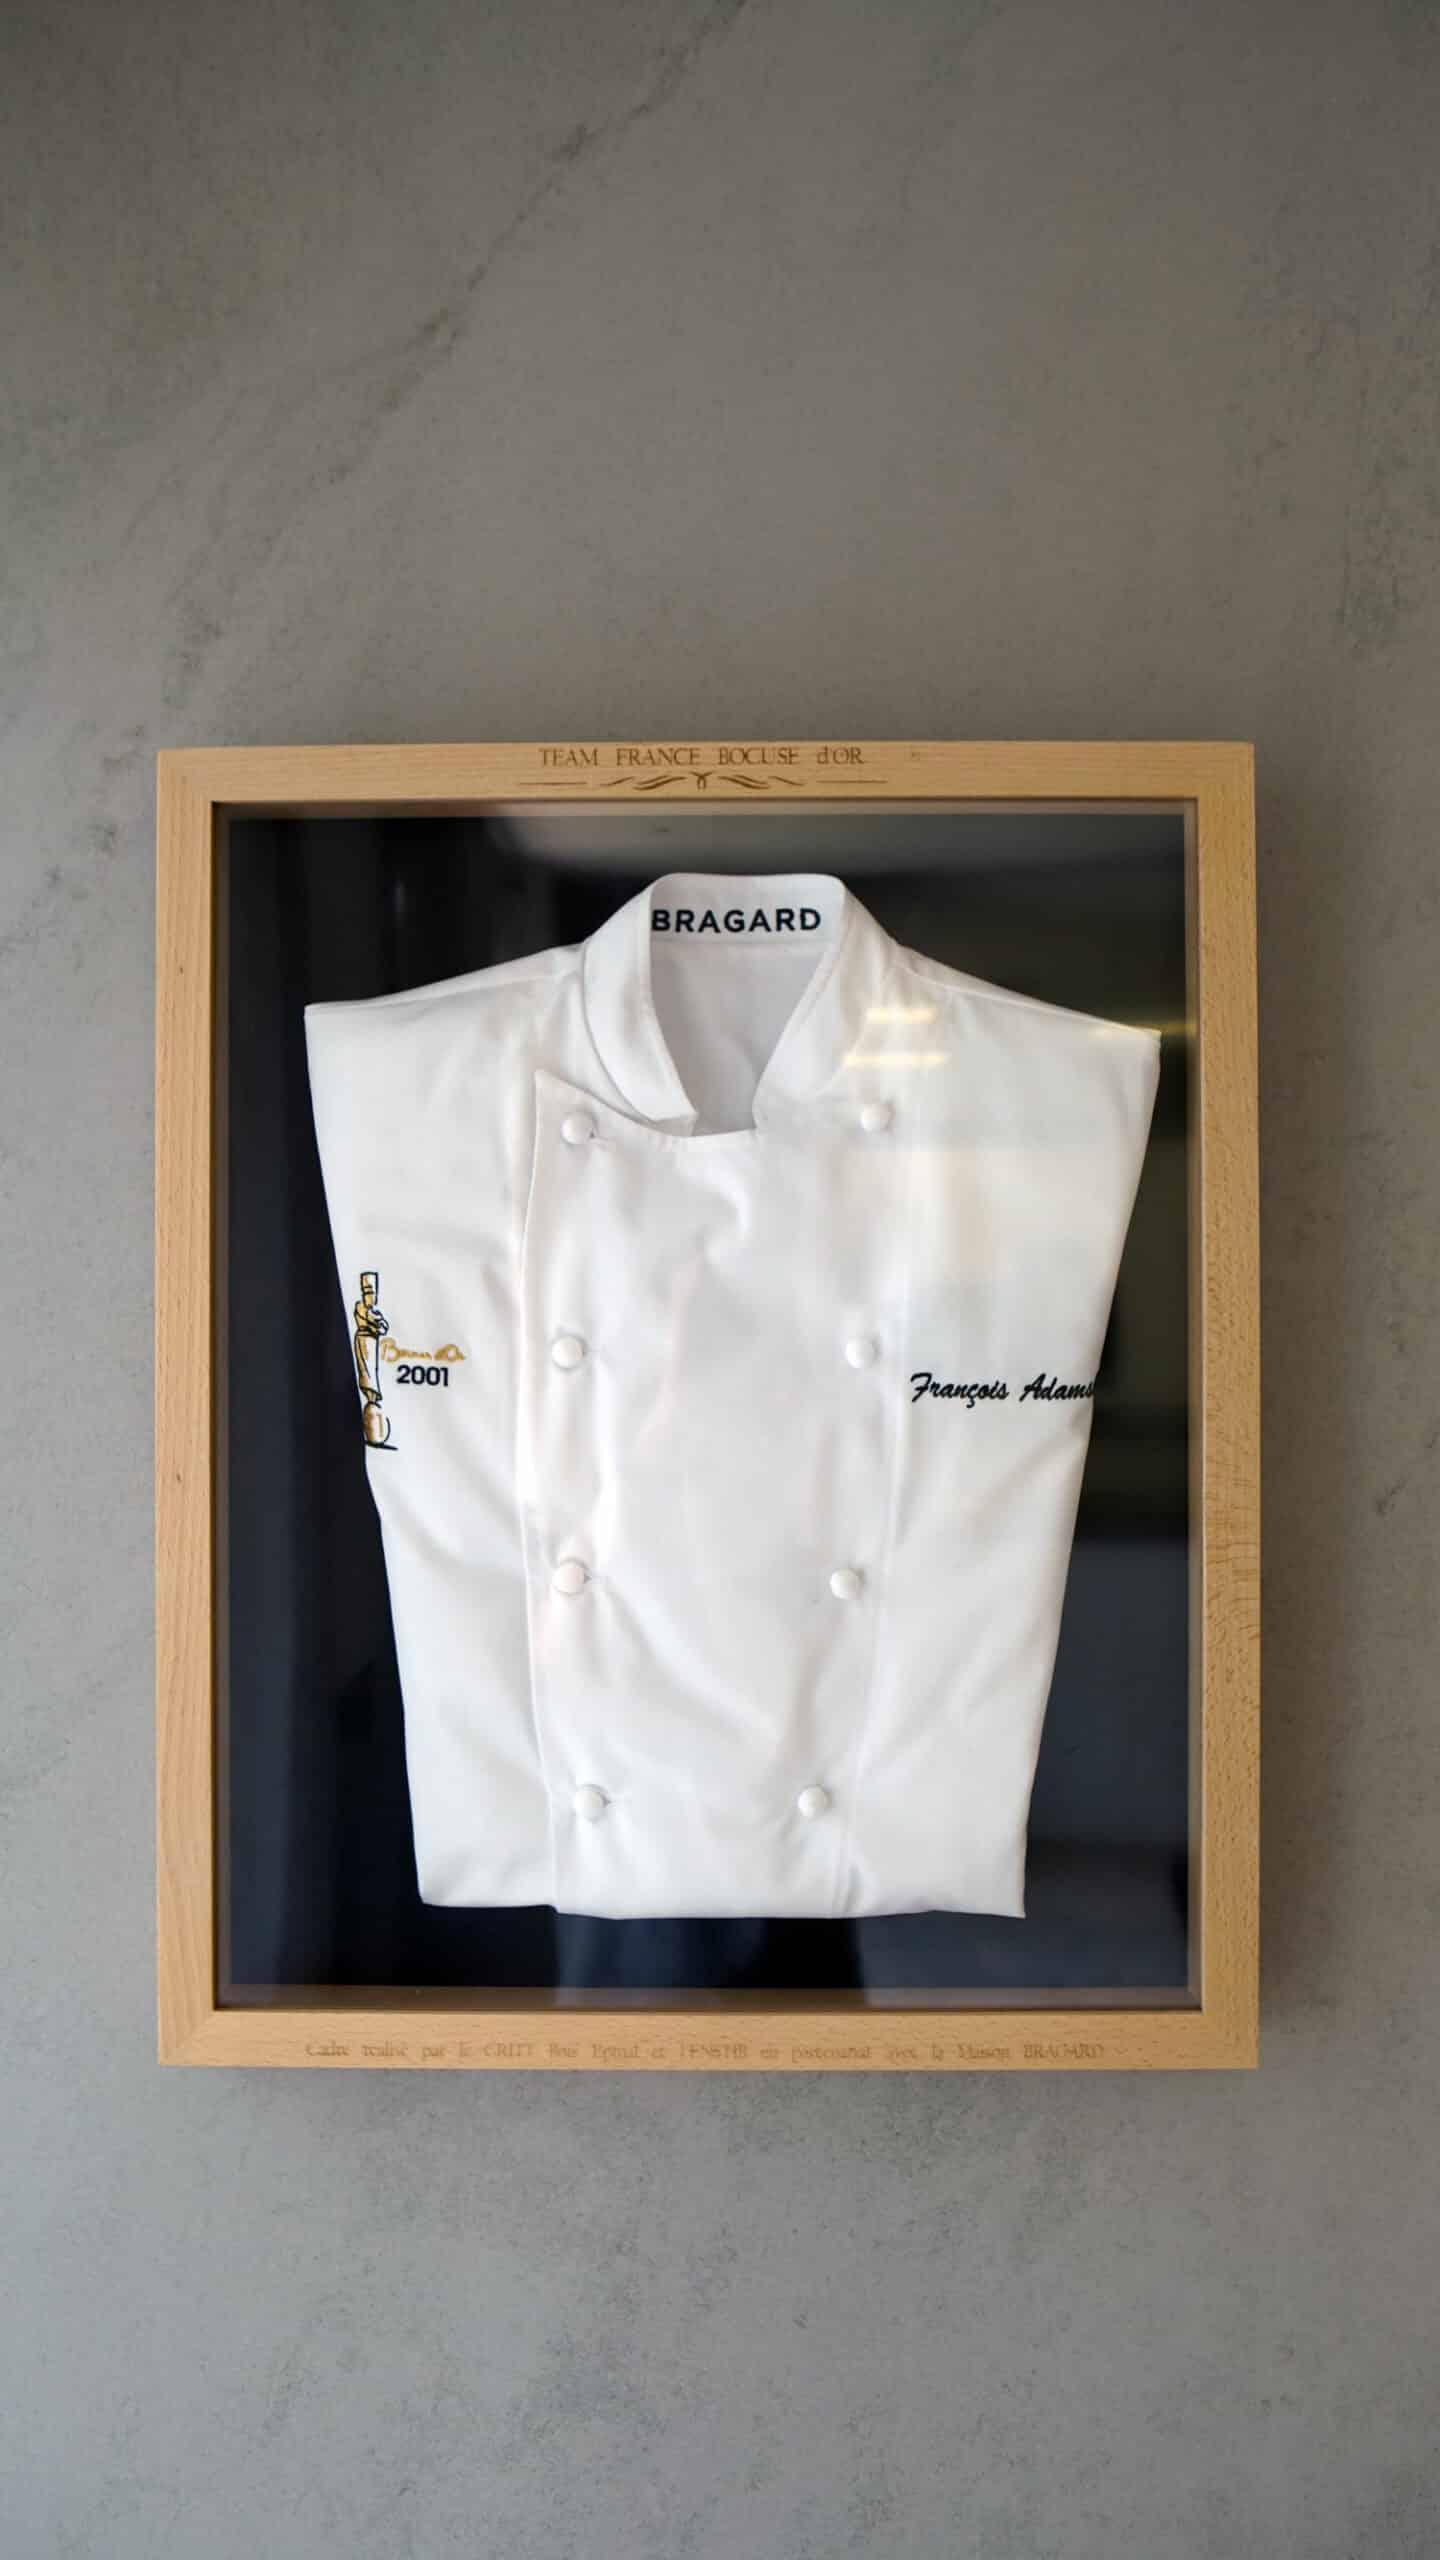 Image of Le Bocuse dOr 4 scaled 1 in Le Bocuse D'or - Cosentino